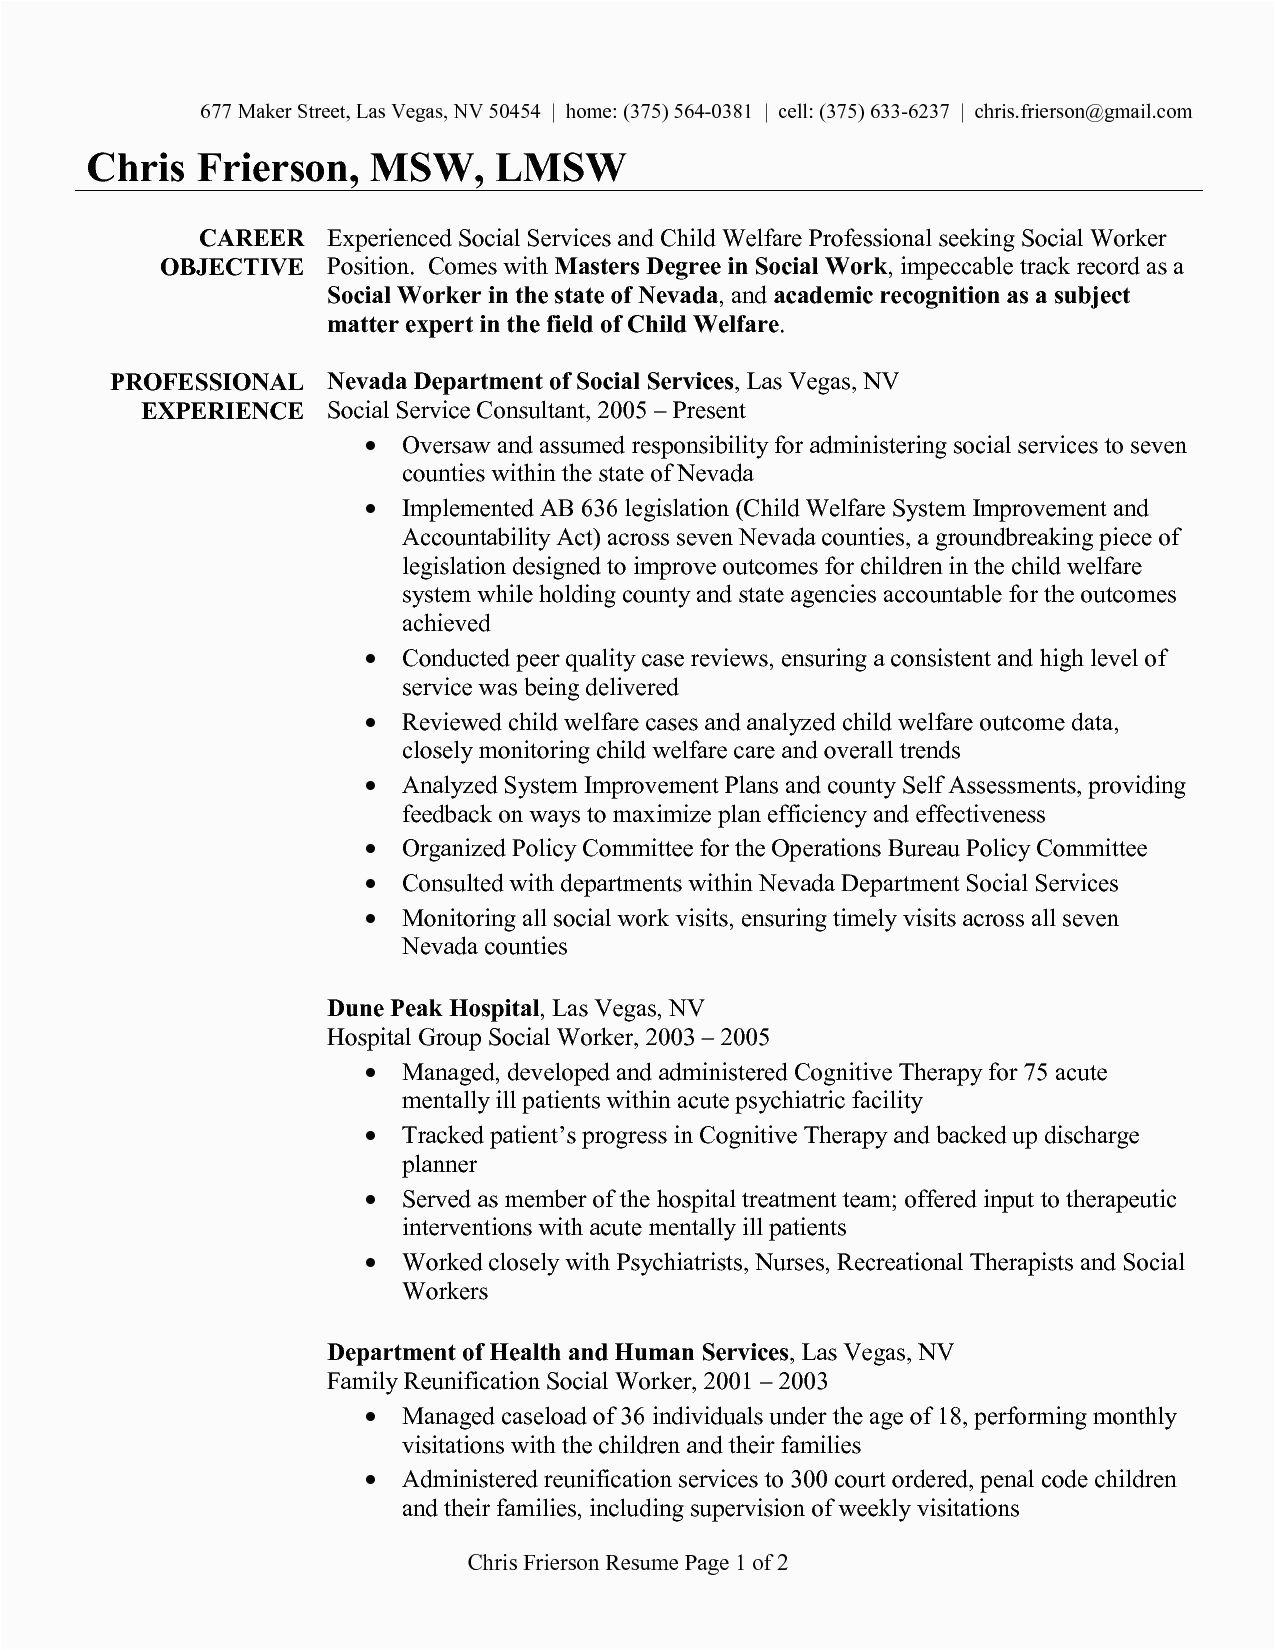 Resume Samples for social Workers Objective social Worker Resume